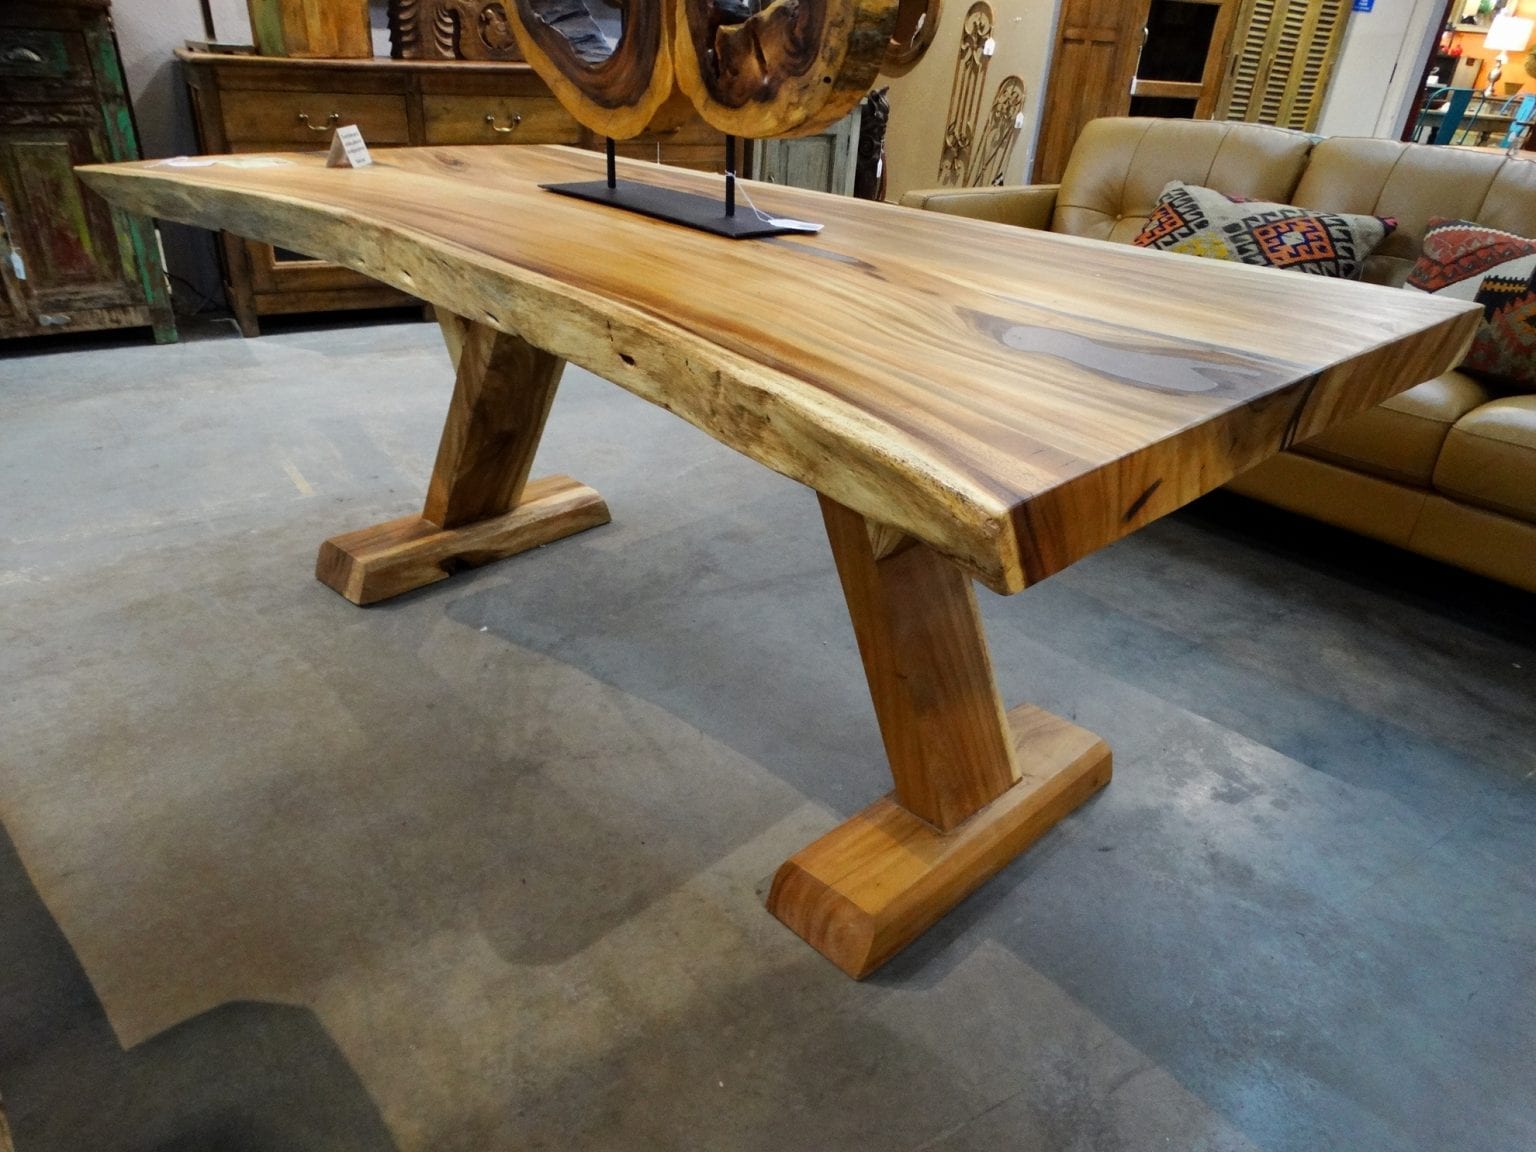 Wood Dining Table with Wood Legs features a rustic farmhouse look.